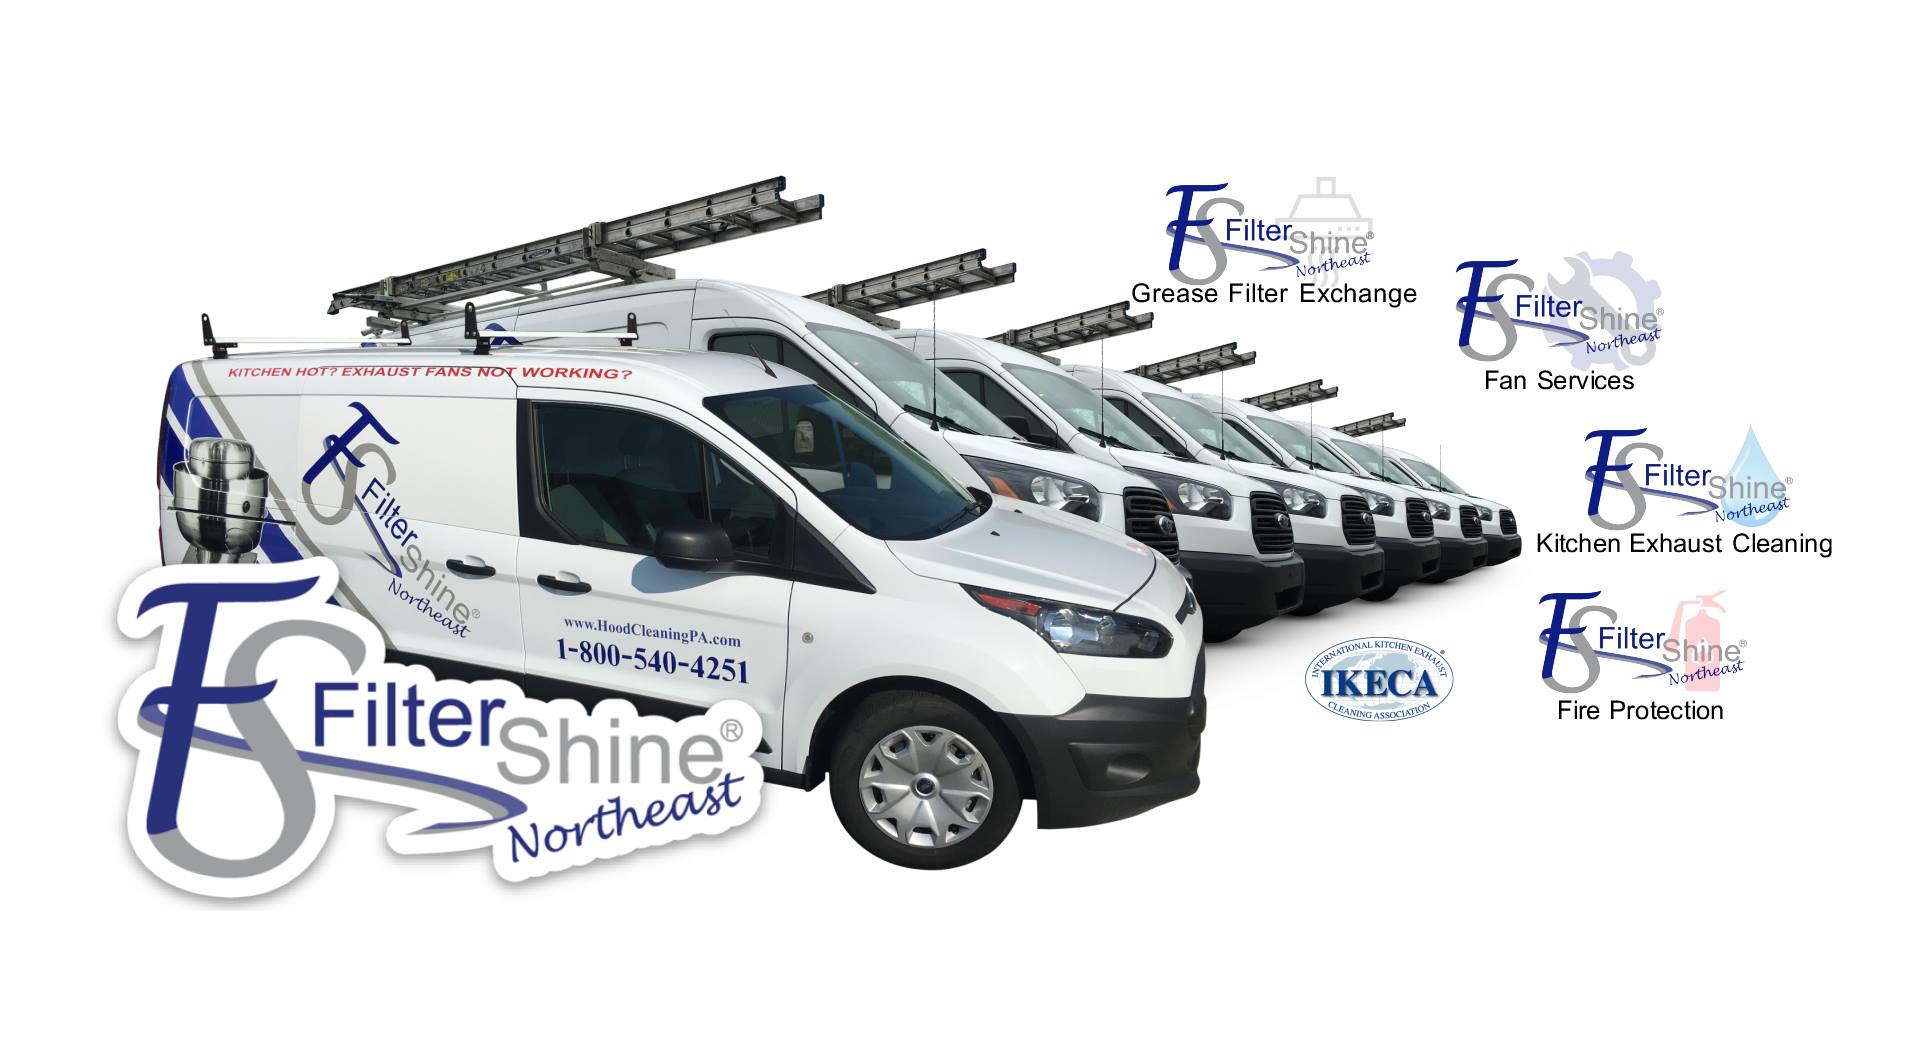 FilterShine Northeast Vans and Services